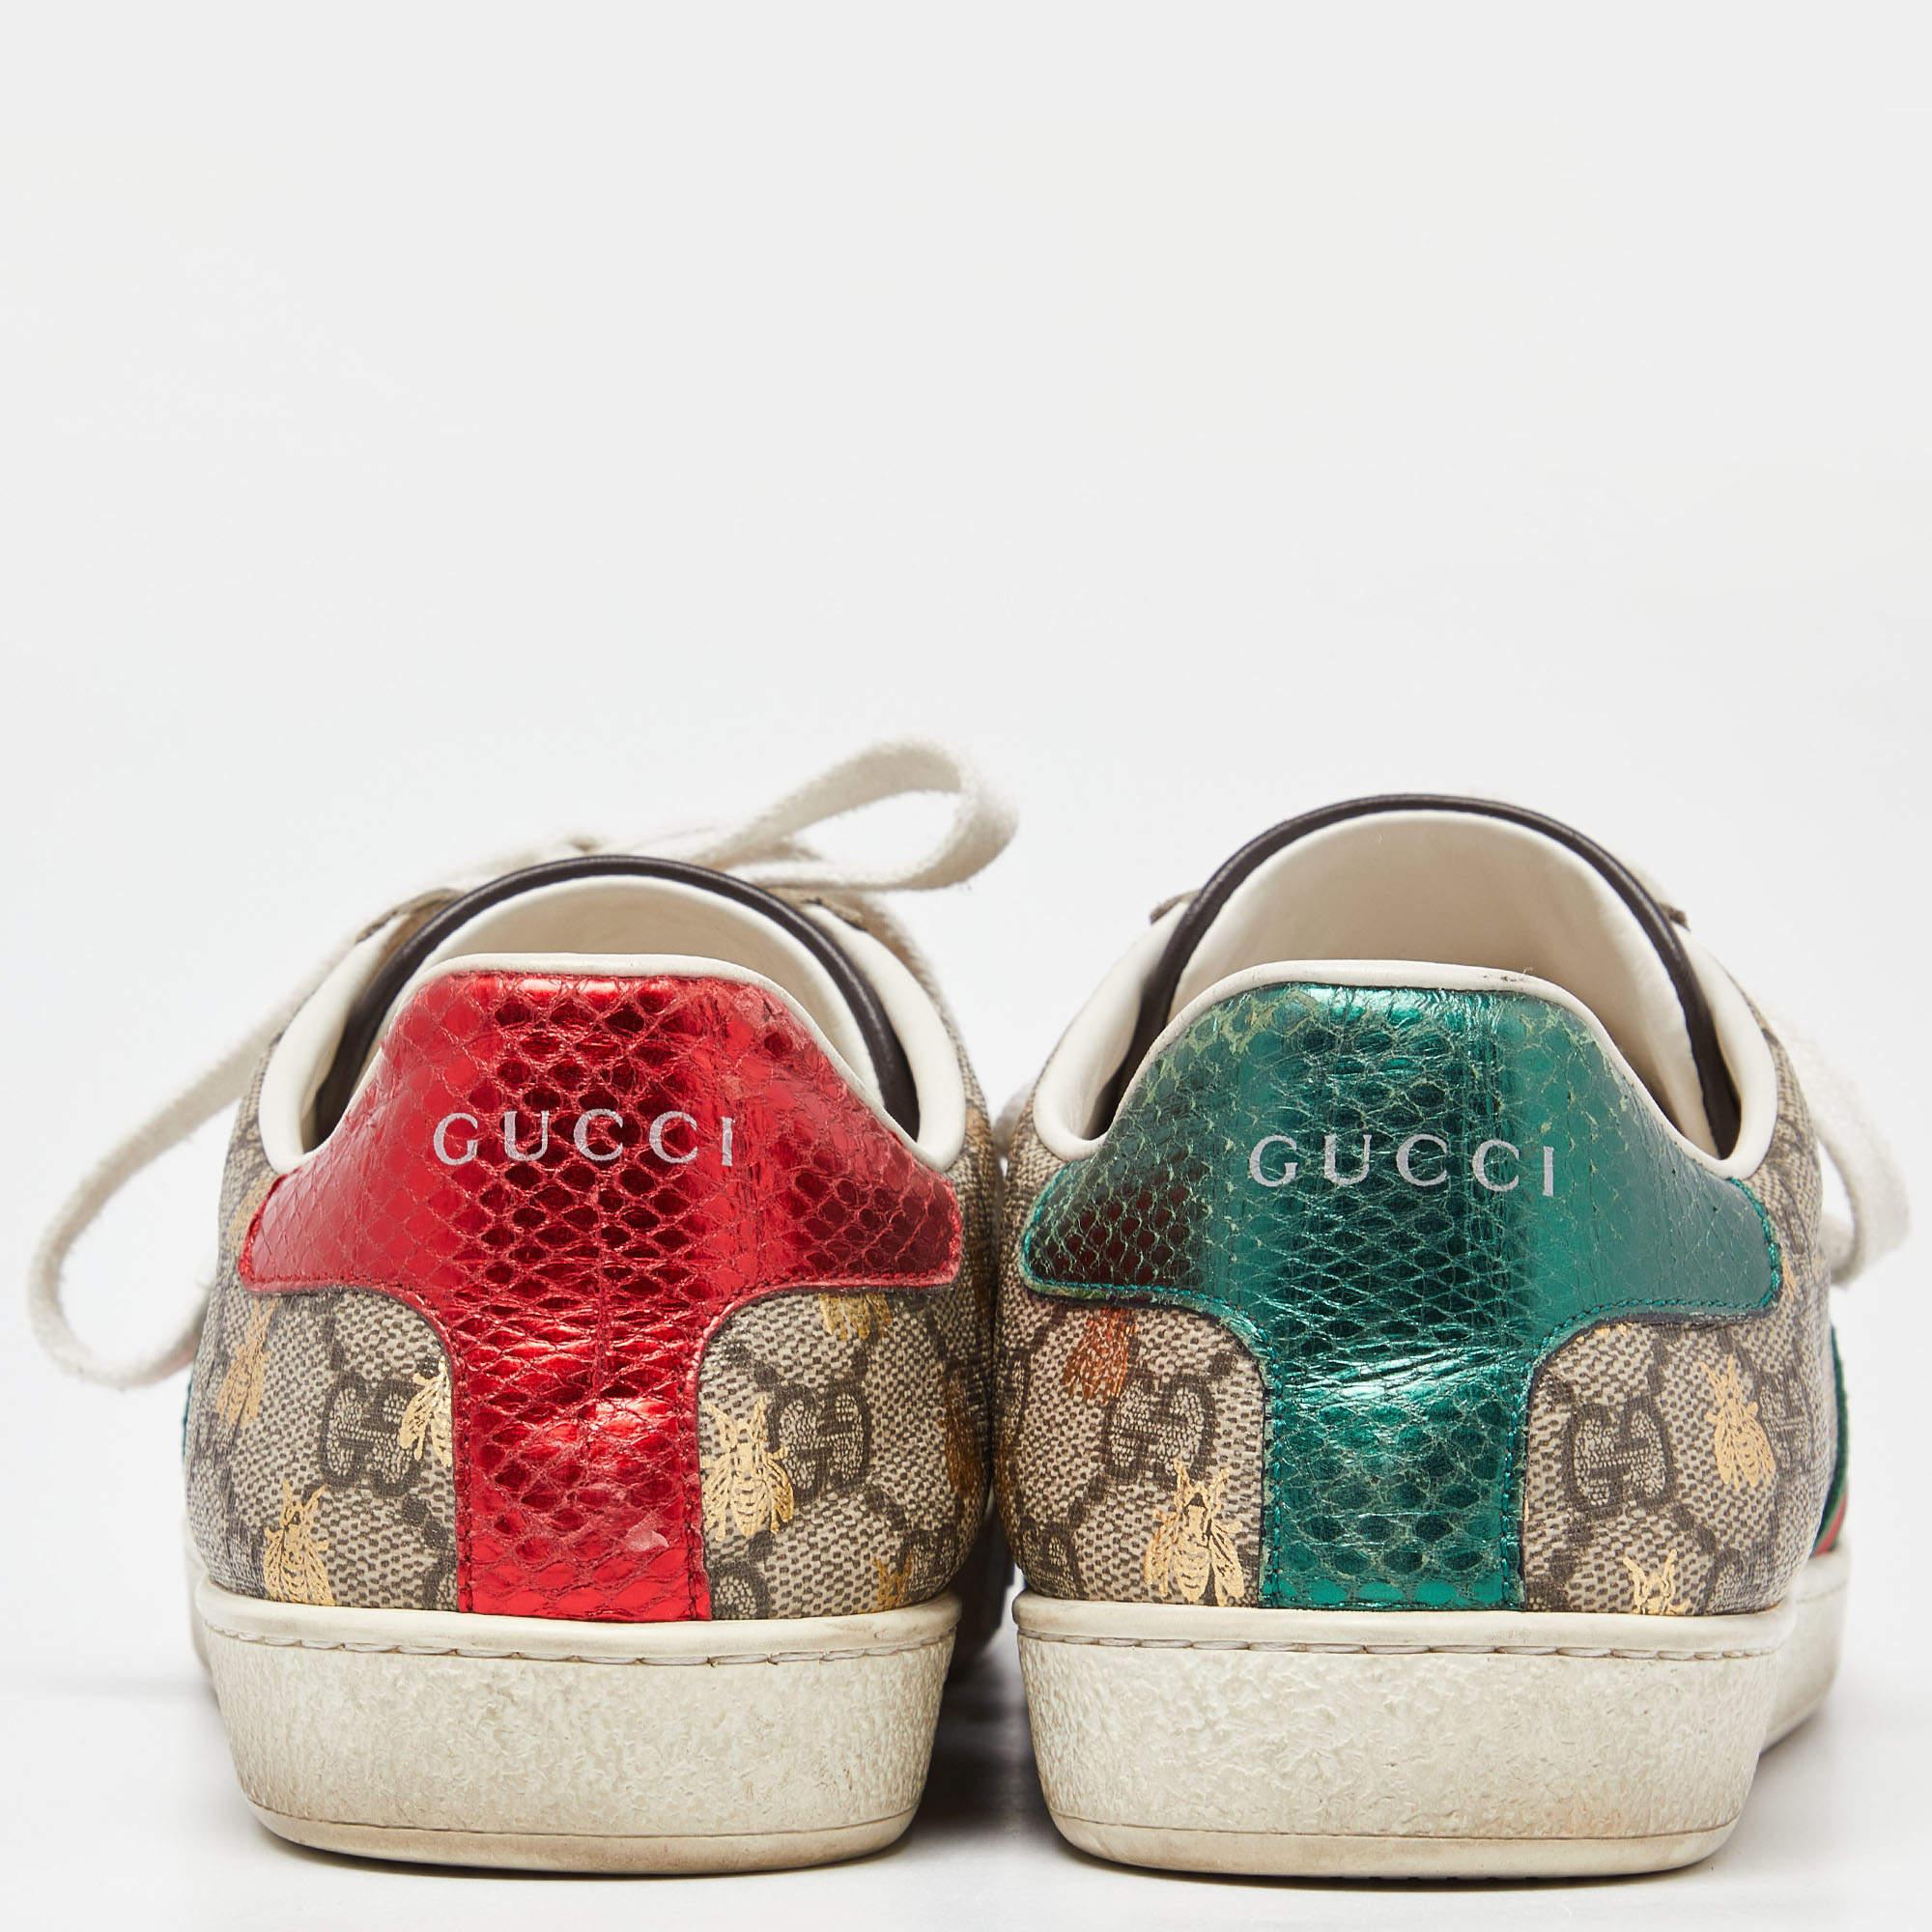 Gucci Beige GG Supreme Canvas Bee Print Ace Low Top Sneakers Size 39 2